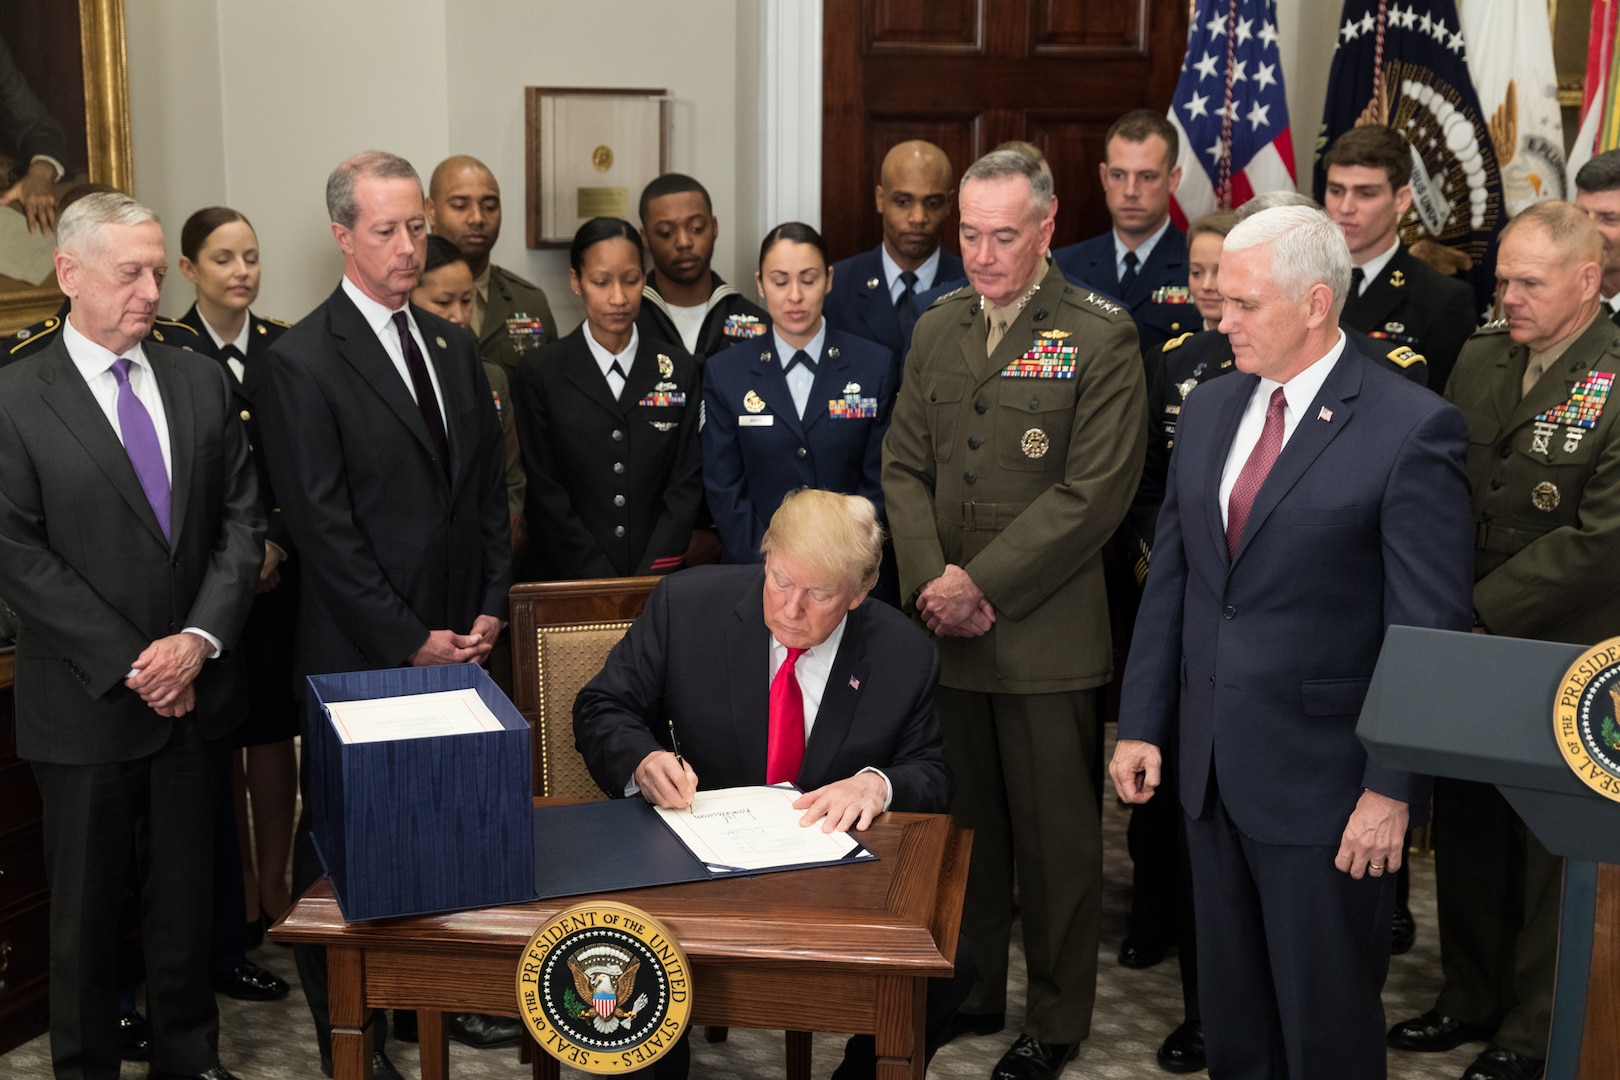 President Donald J. Trump, joined by Vice President Mike Pence and senior military leaders, signs H.R. 2810, the National Defense Authorization Act for fiscal year 2018, in the Roosevelt Room at the White House, Dec. 12, 2017.